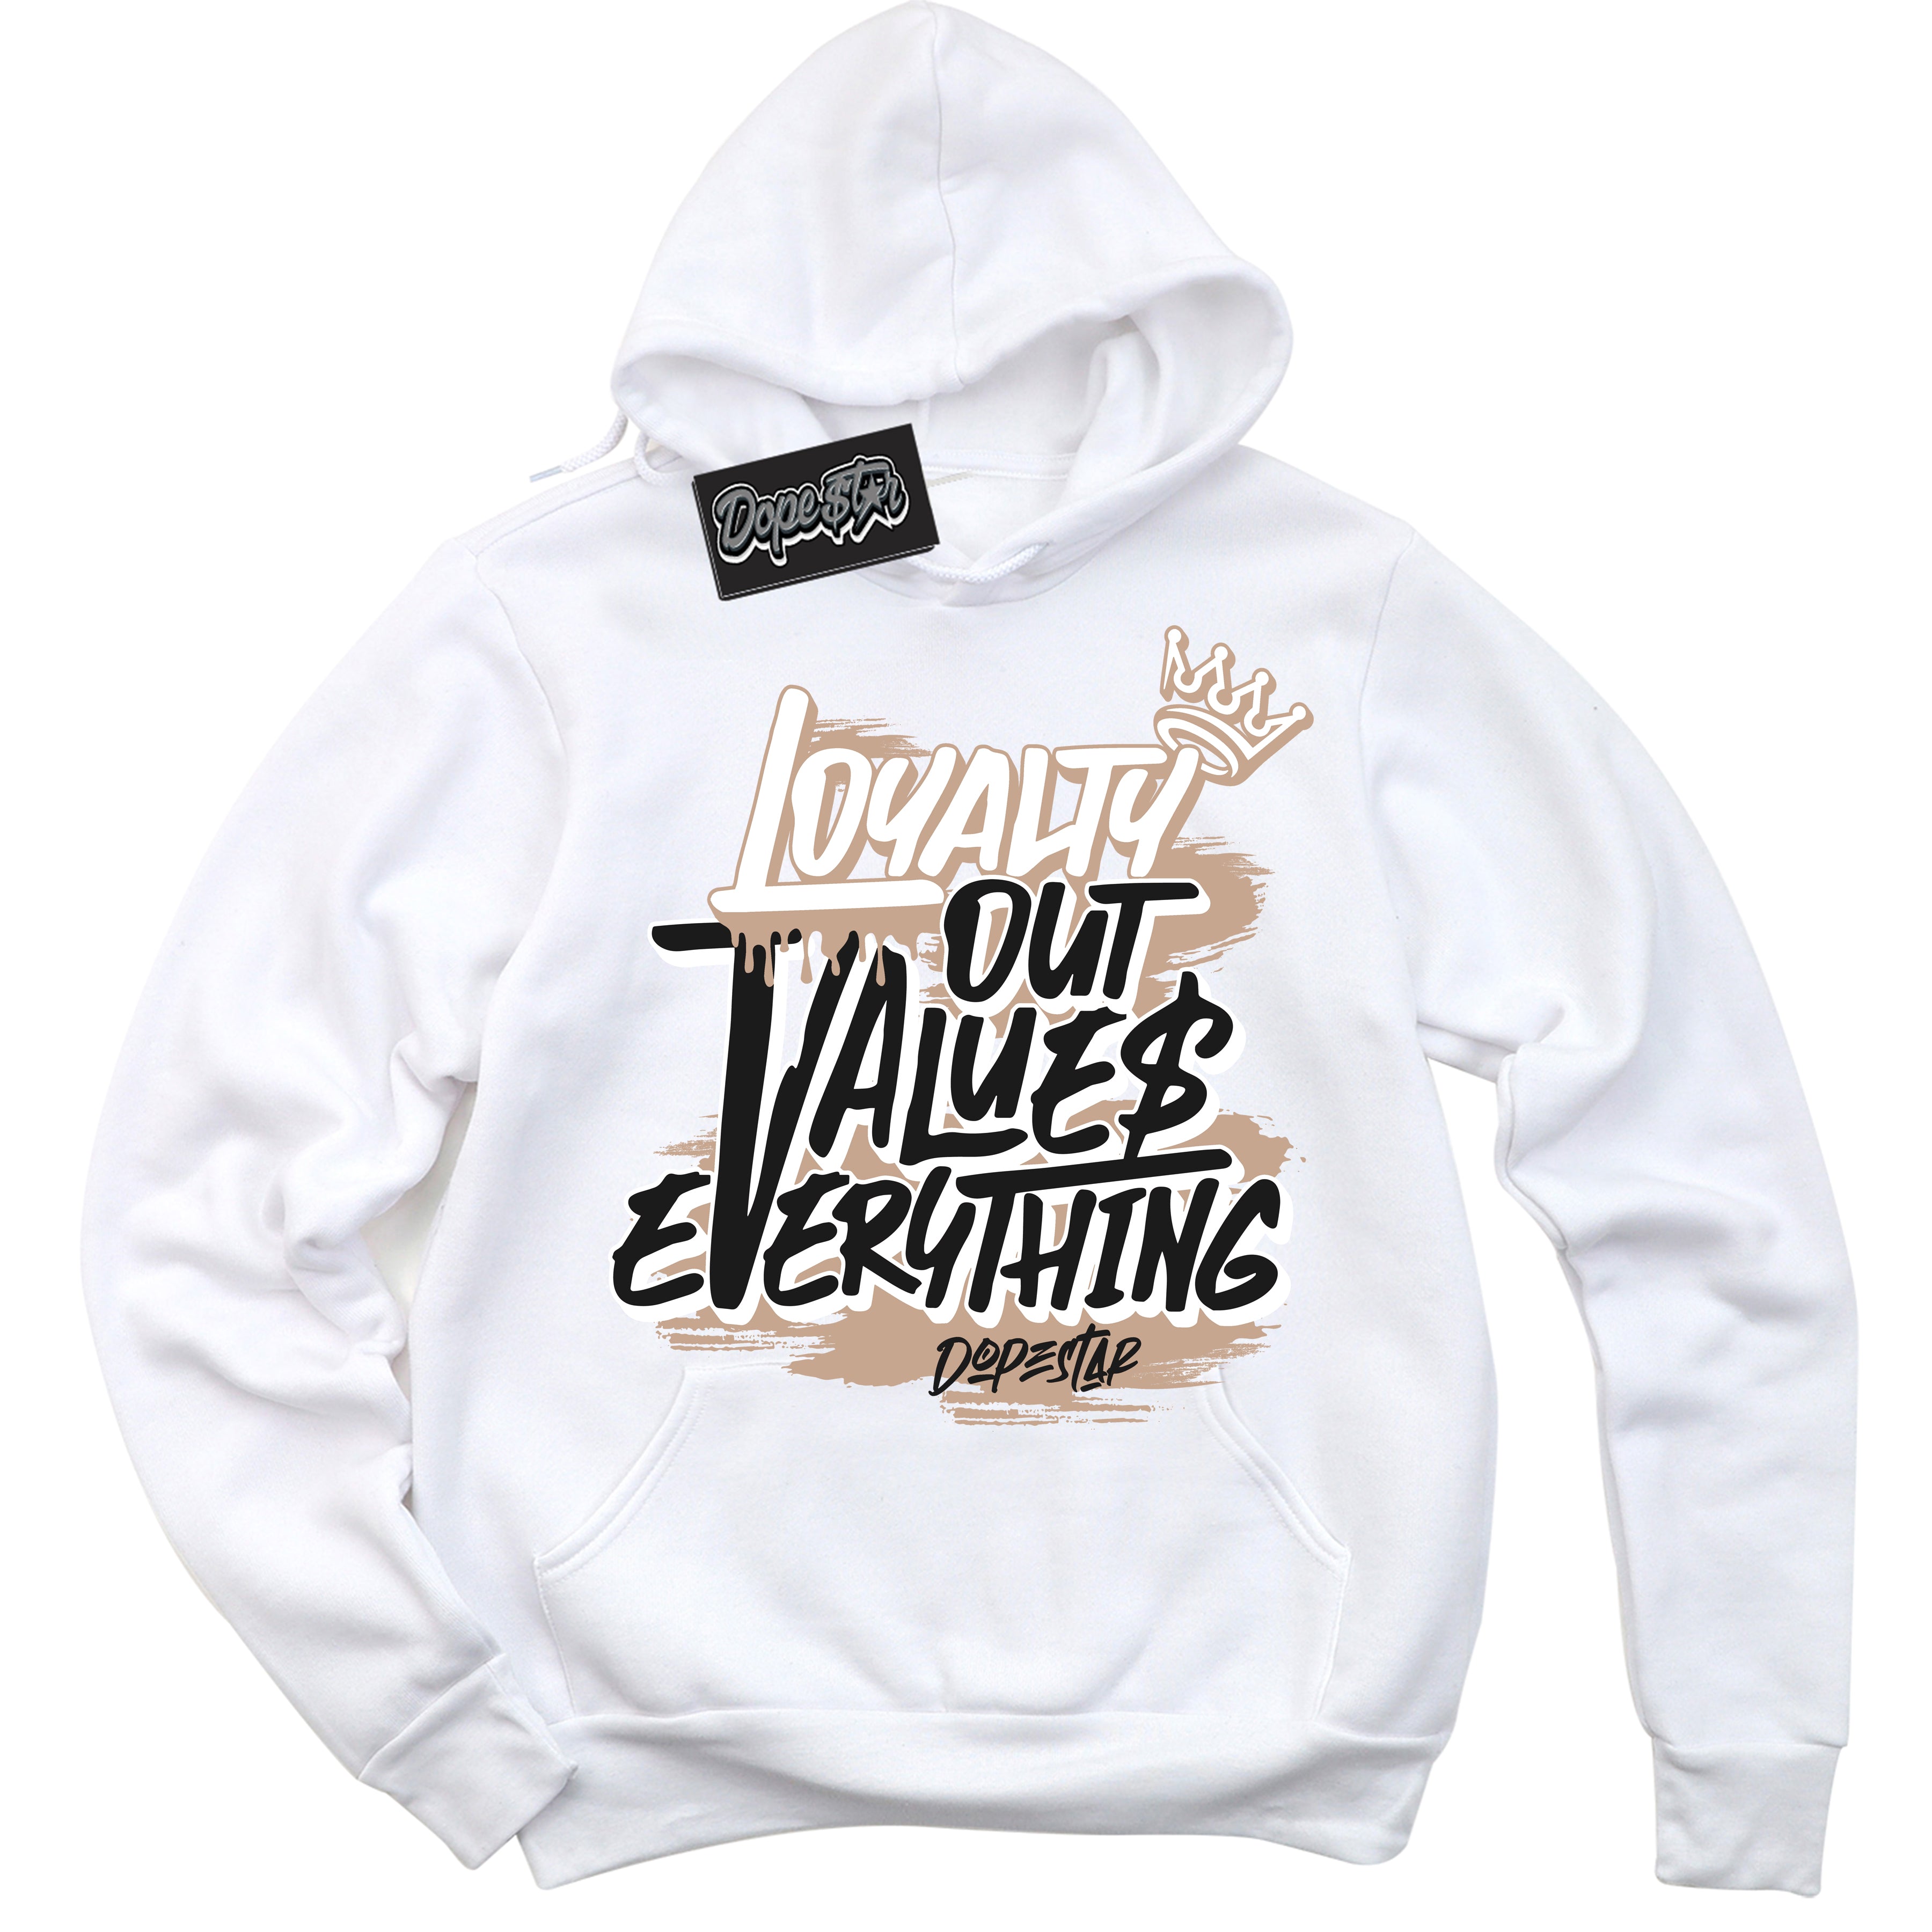 Cool White Hoodie with “ Loyalty Out Values Everything ”  design that Perfectly Matches Gratitude 11s Sneakers.